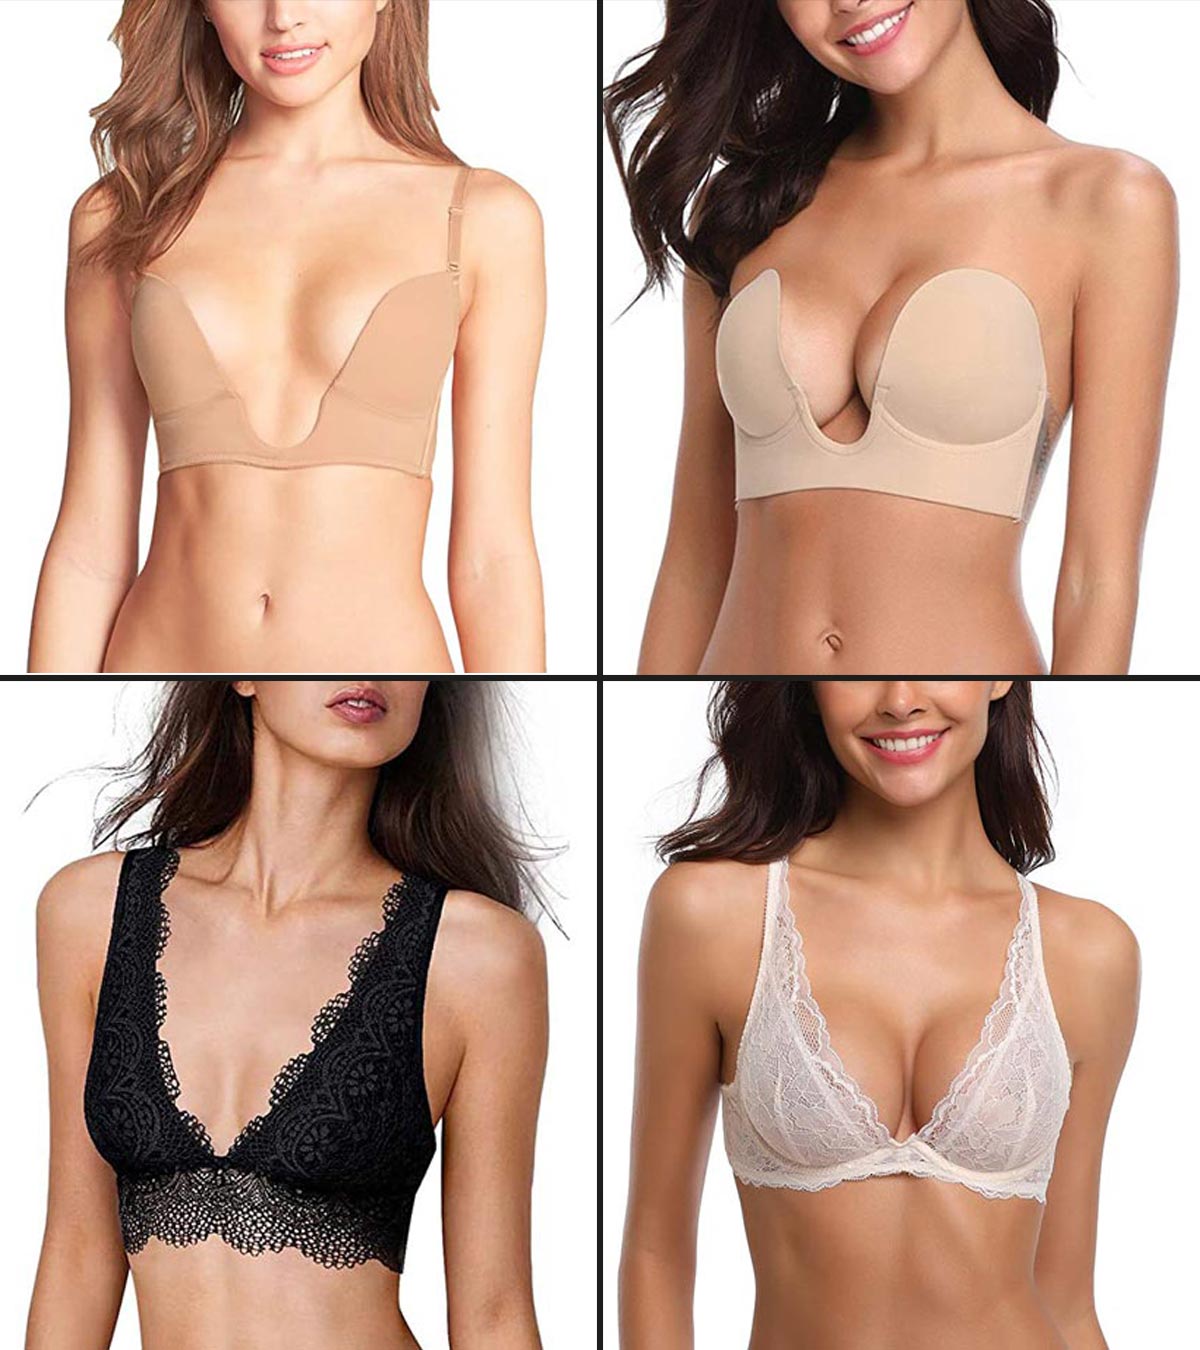 What are some good bra solutions for a low back dress? - Quora